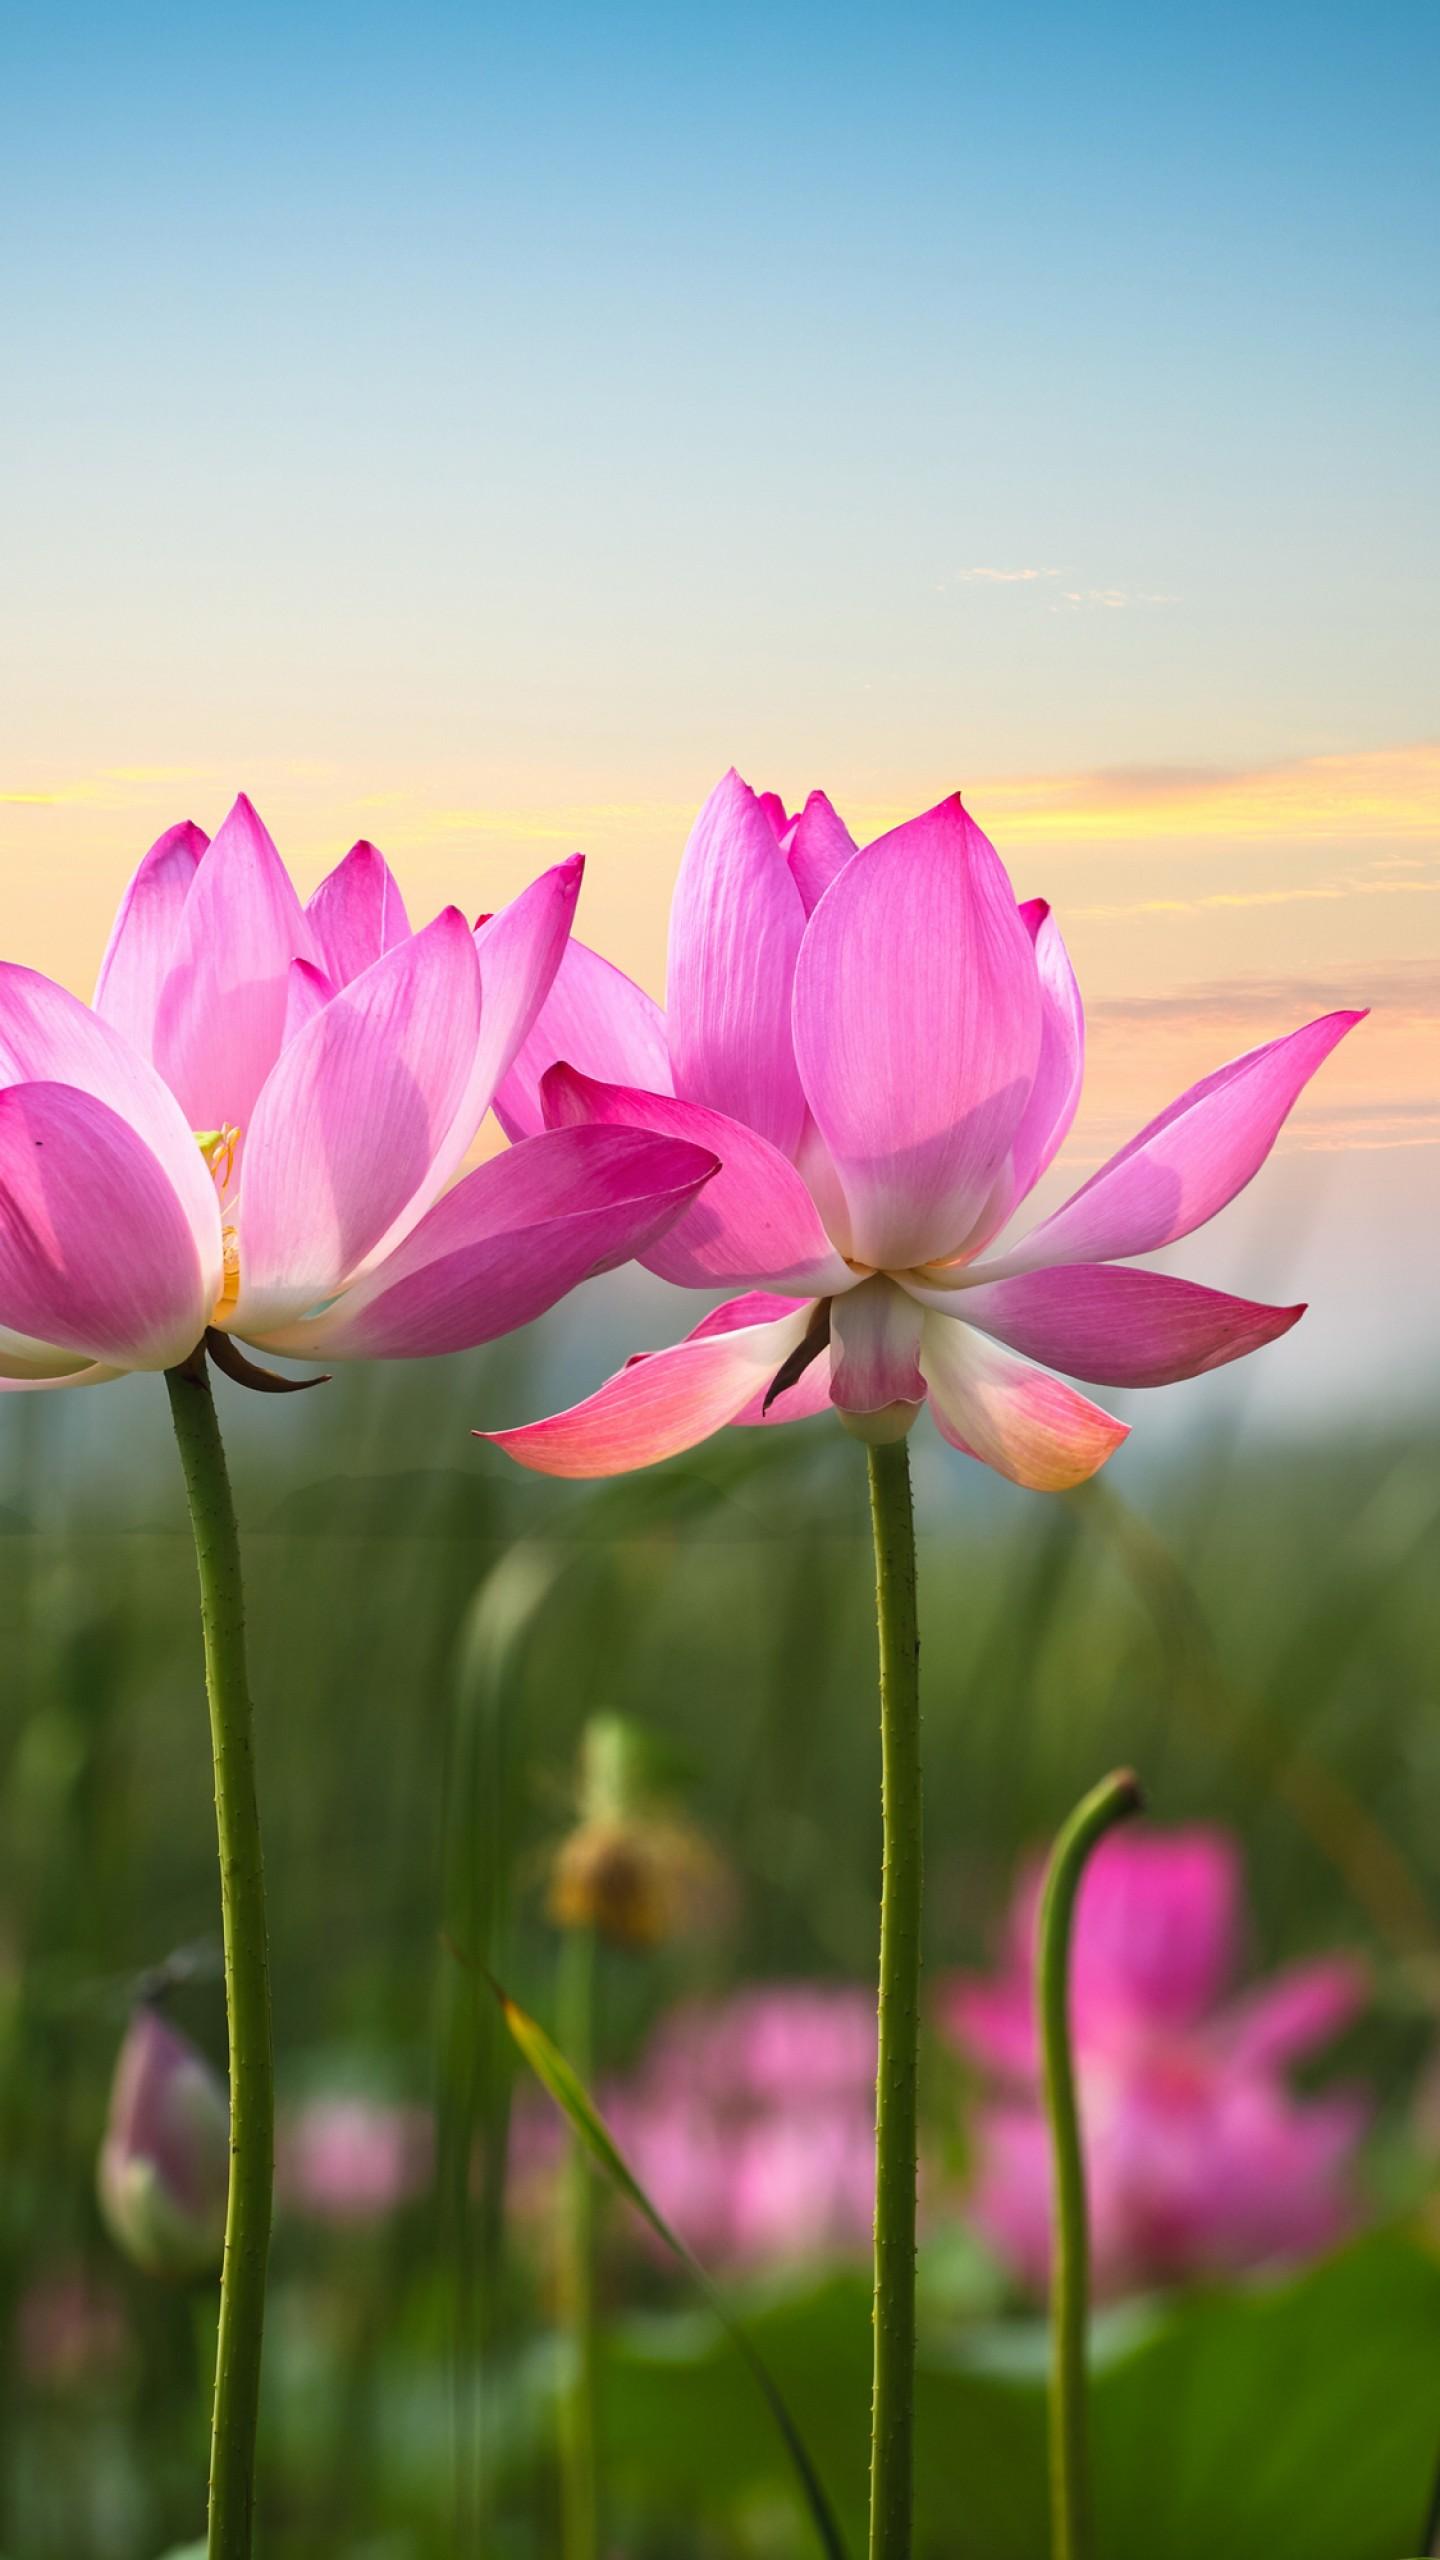 Wallpaper Lotus flowers, Pink flowers, HD, Flowers,. Wallpaper for iPhone, Android, Mobile and Desktop